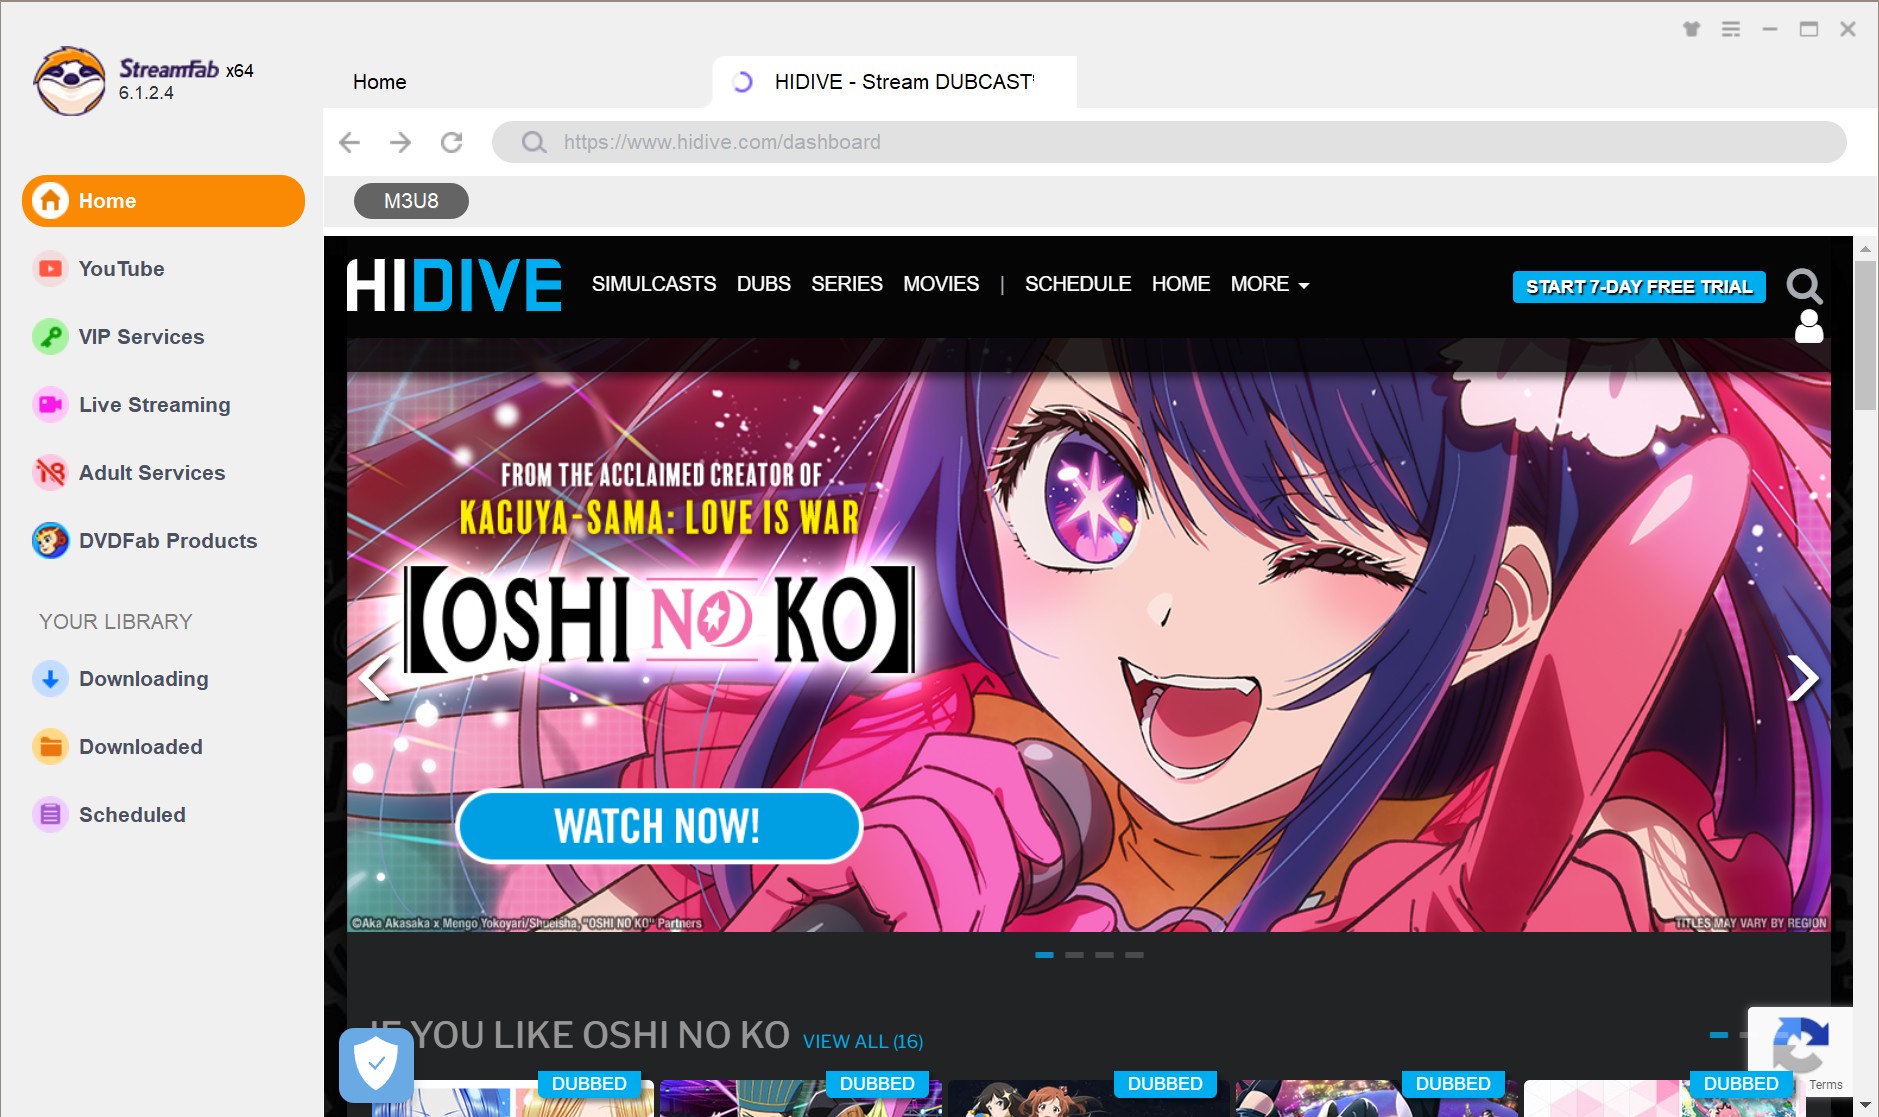 Top 10 Anime on HIDIVE According to MAL